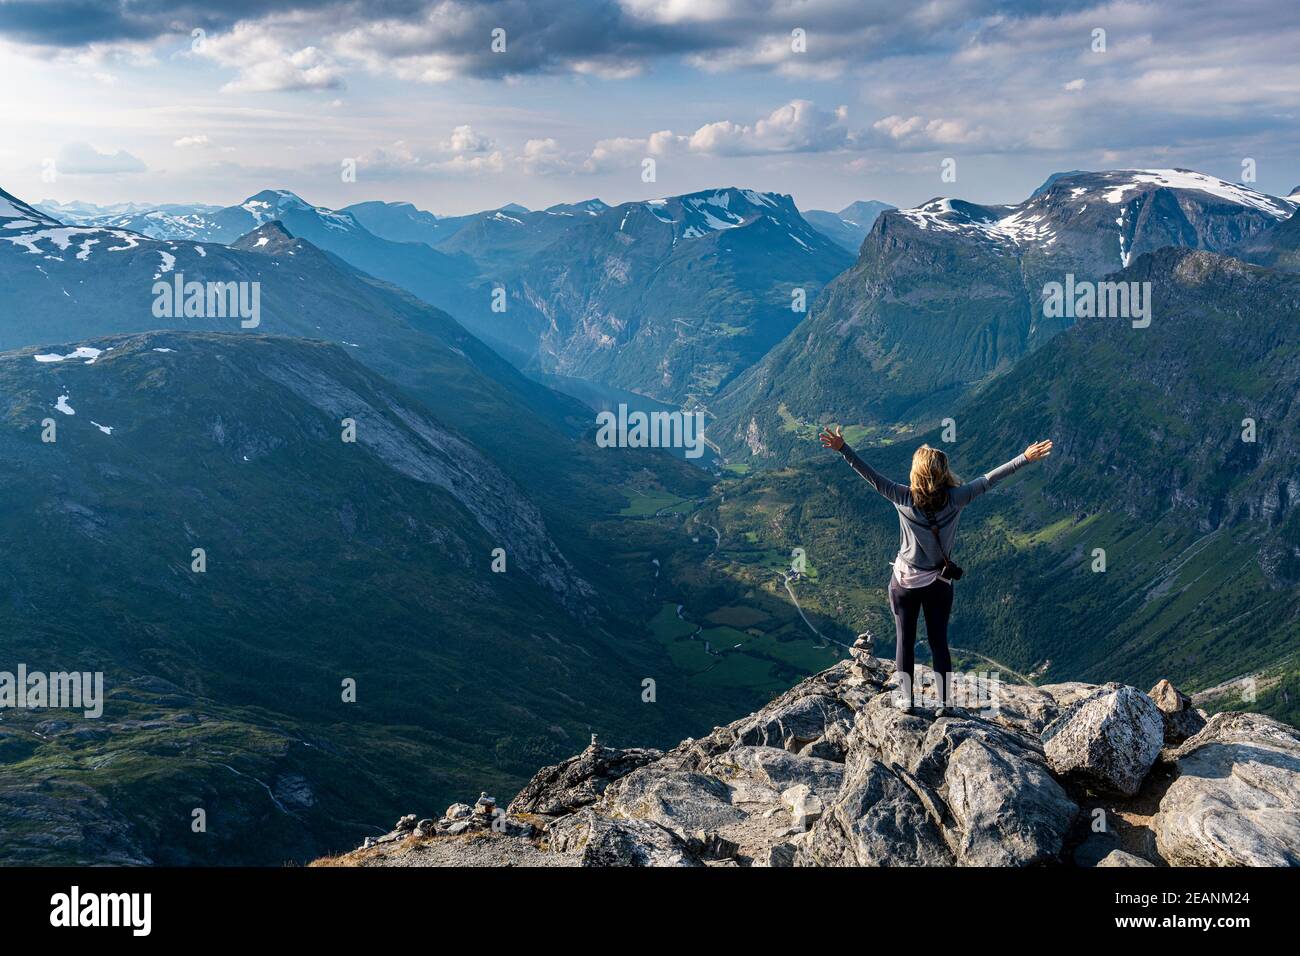 Woman standing on Dalsnibba View point, Geirangerfjord, UNESCO World Heritage Site, Sunnmore, Norway, Scandinavia, Europe Stock Photo